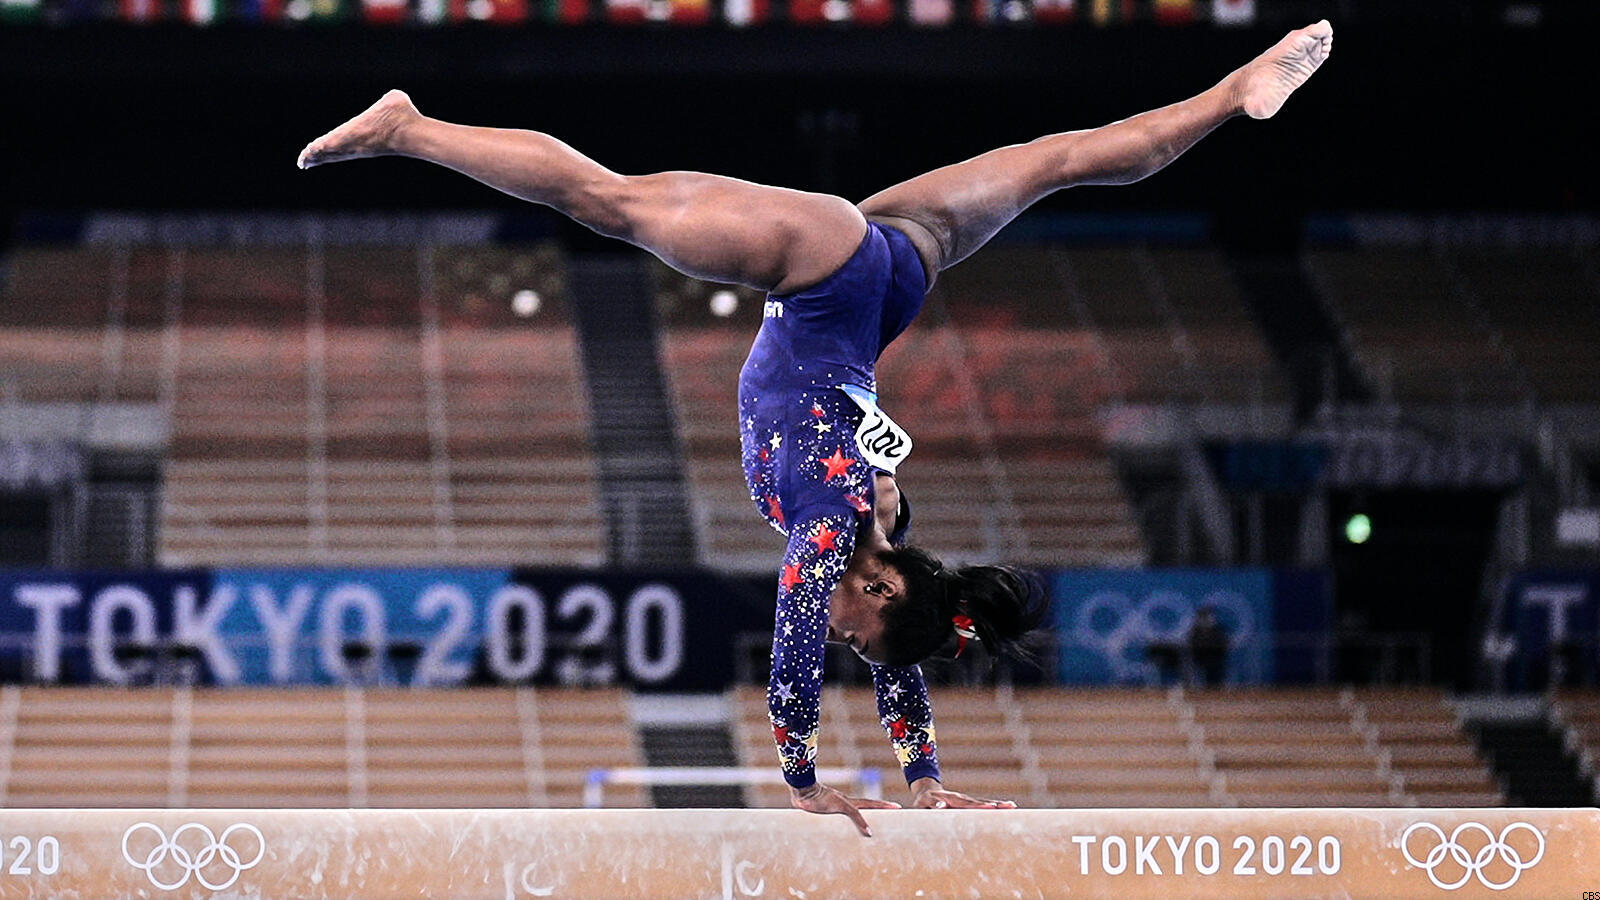 Tokyo Olympics: How to Watch Simone Biles and Suni Lee in the Balance Beam Event Final